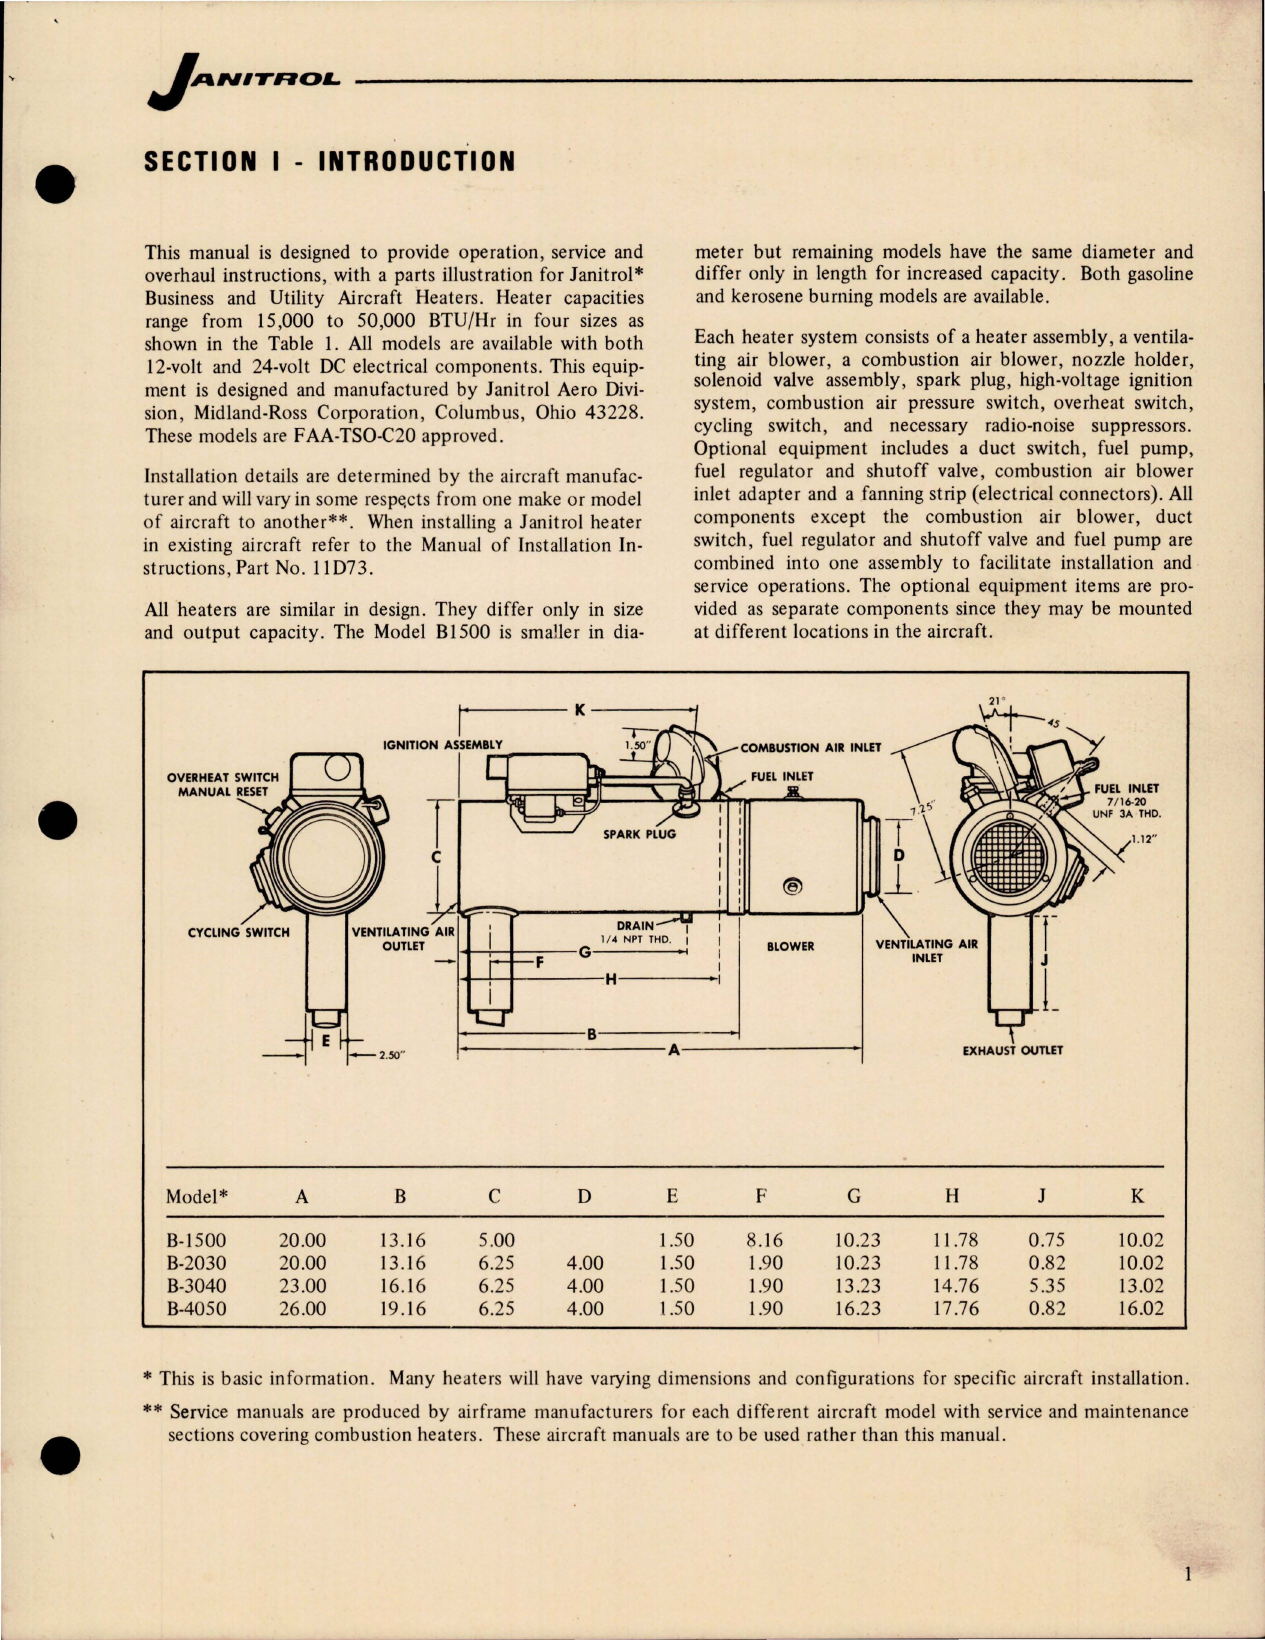 Sample page 5 from AirCorps Library document: Maintenance and Overhaul for Business and Utility Aircraft Heaters 